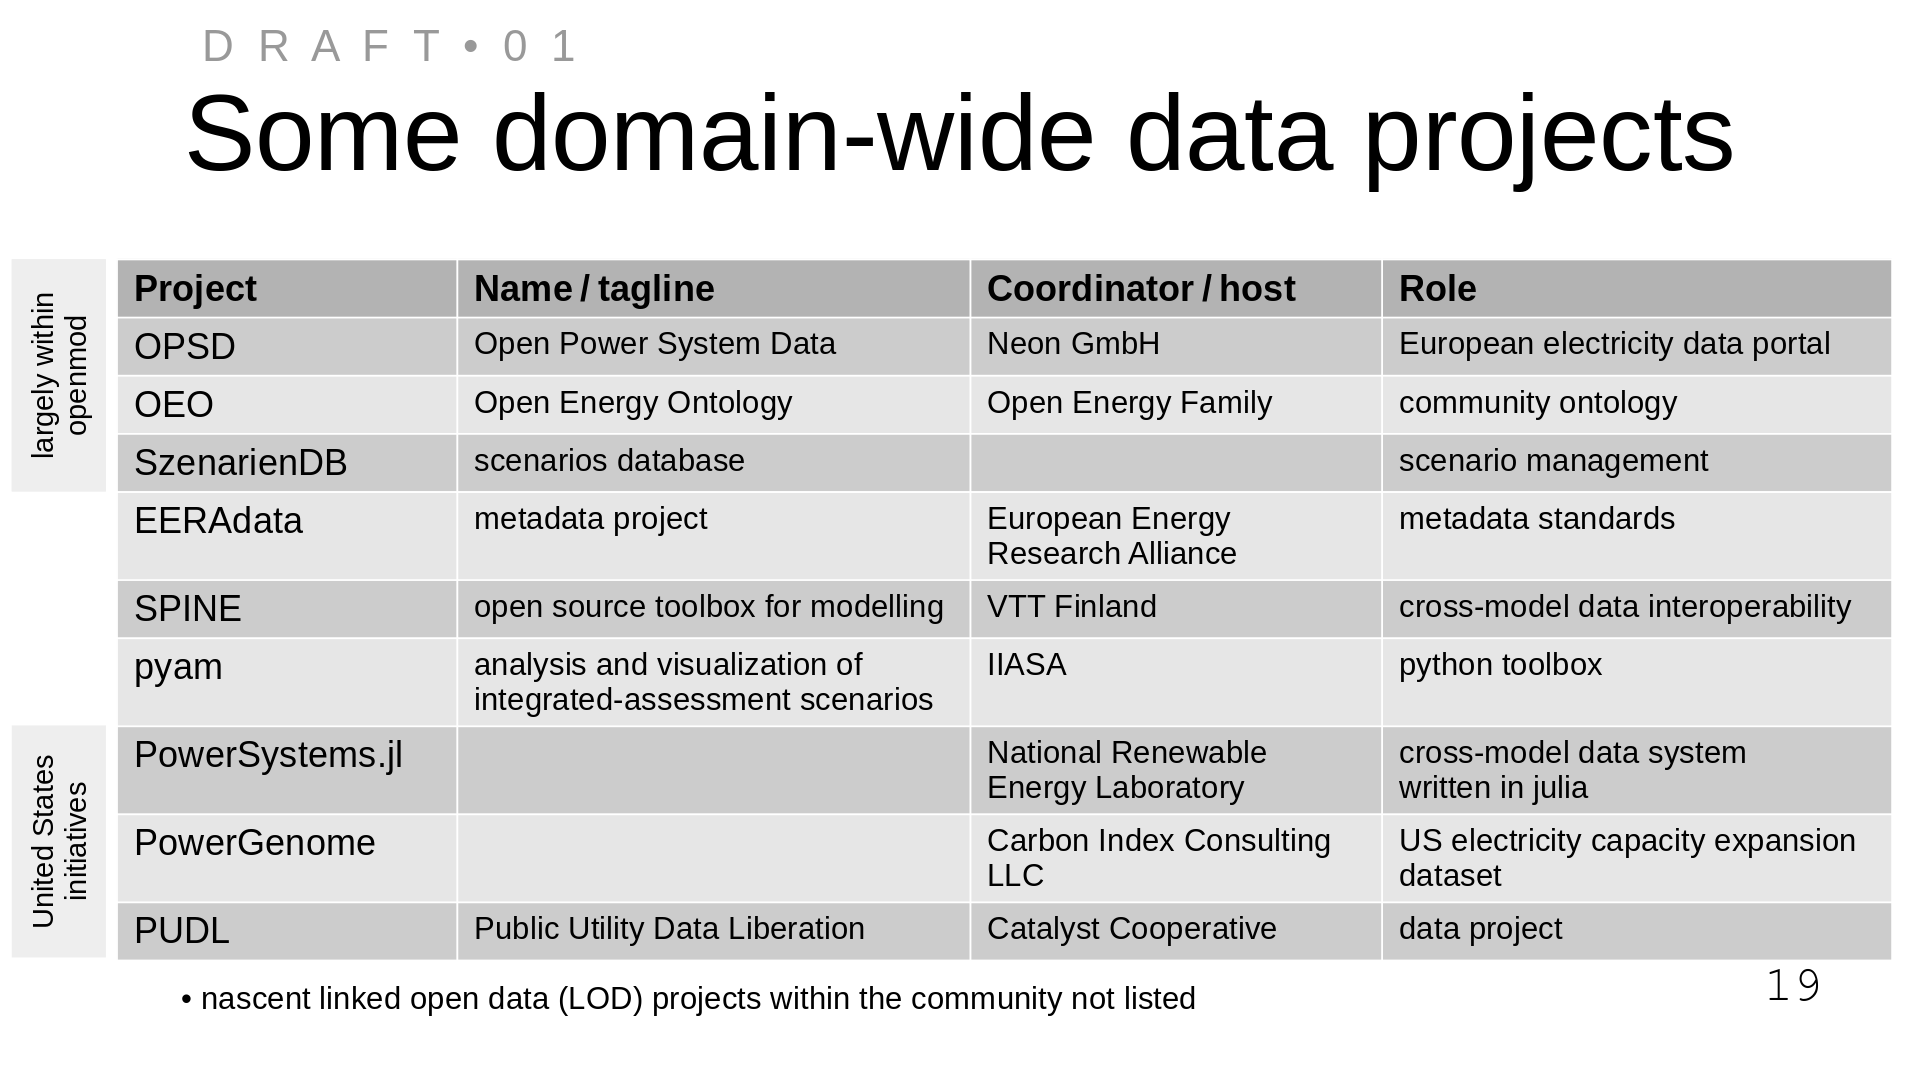 [some-domain-wide-data-projects]